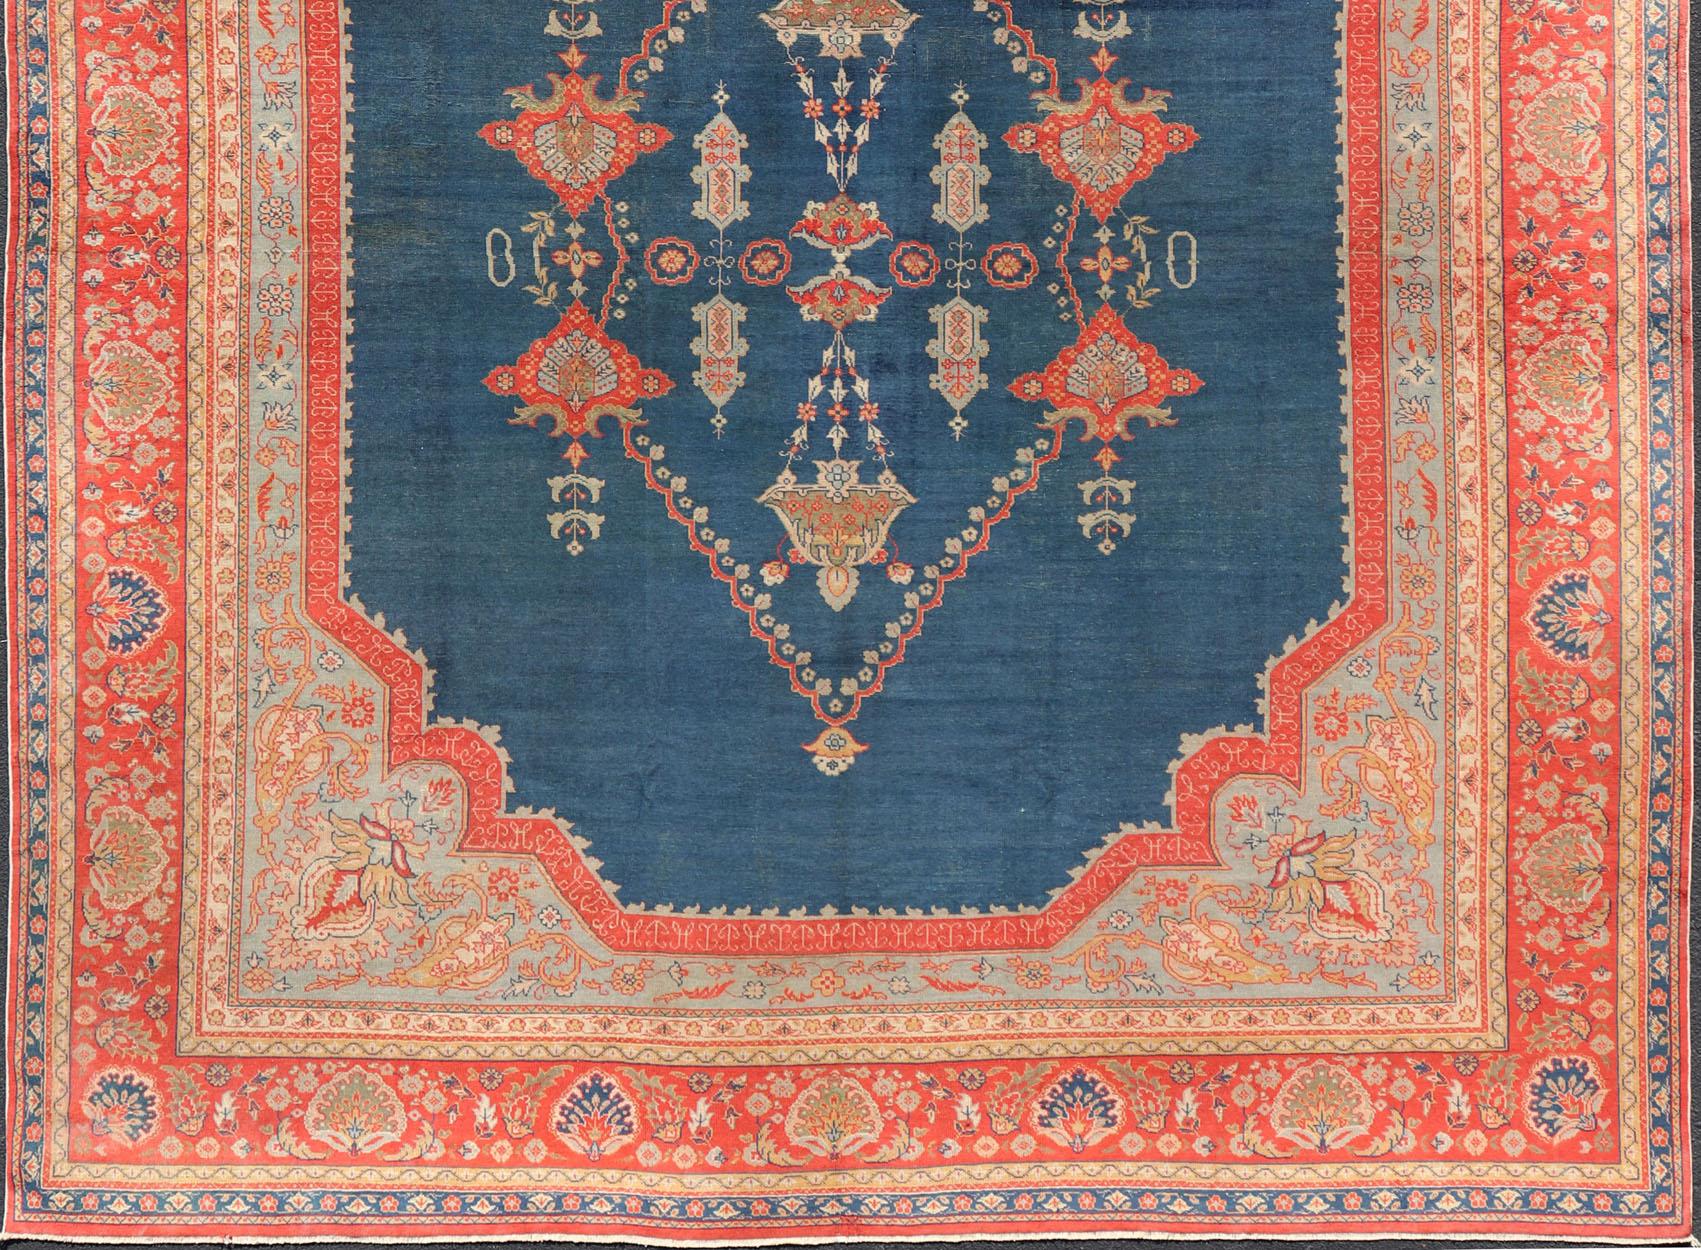 Large Antique Turkish Oushak Rug in Blue and Red with Ornate Medallion Design In Good Condition For Sale In Atlanta, GA